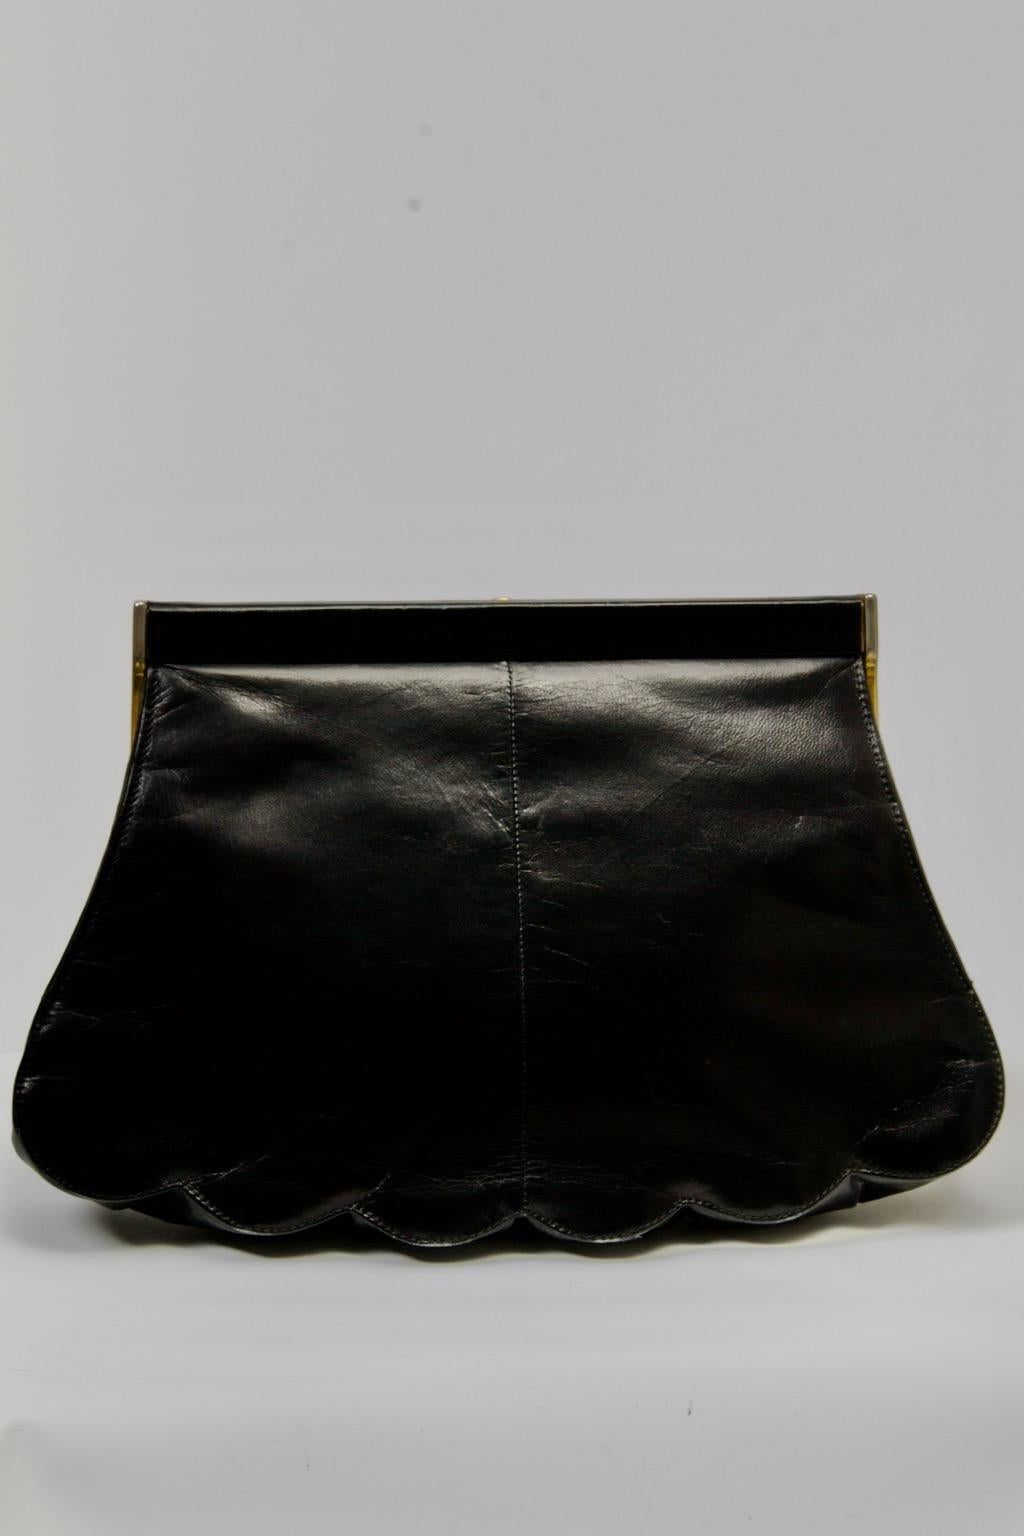 Charles Jourdan black leather clutch, c.1970s,  featuring a scalloped bottom and gold tone hardware with a turnkey lock. Black leather interior with zip compartment and rectangular gold tone tag marked 